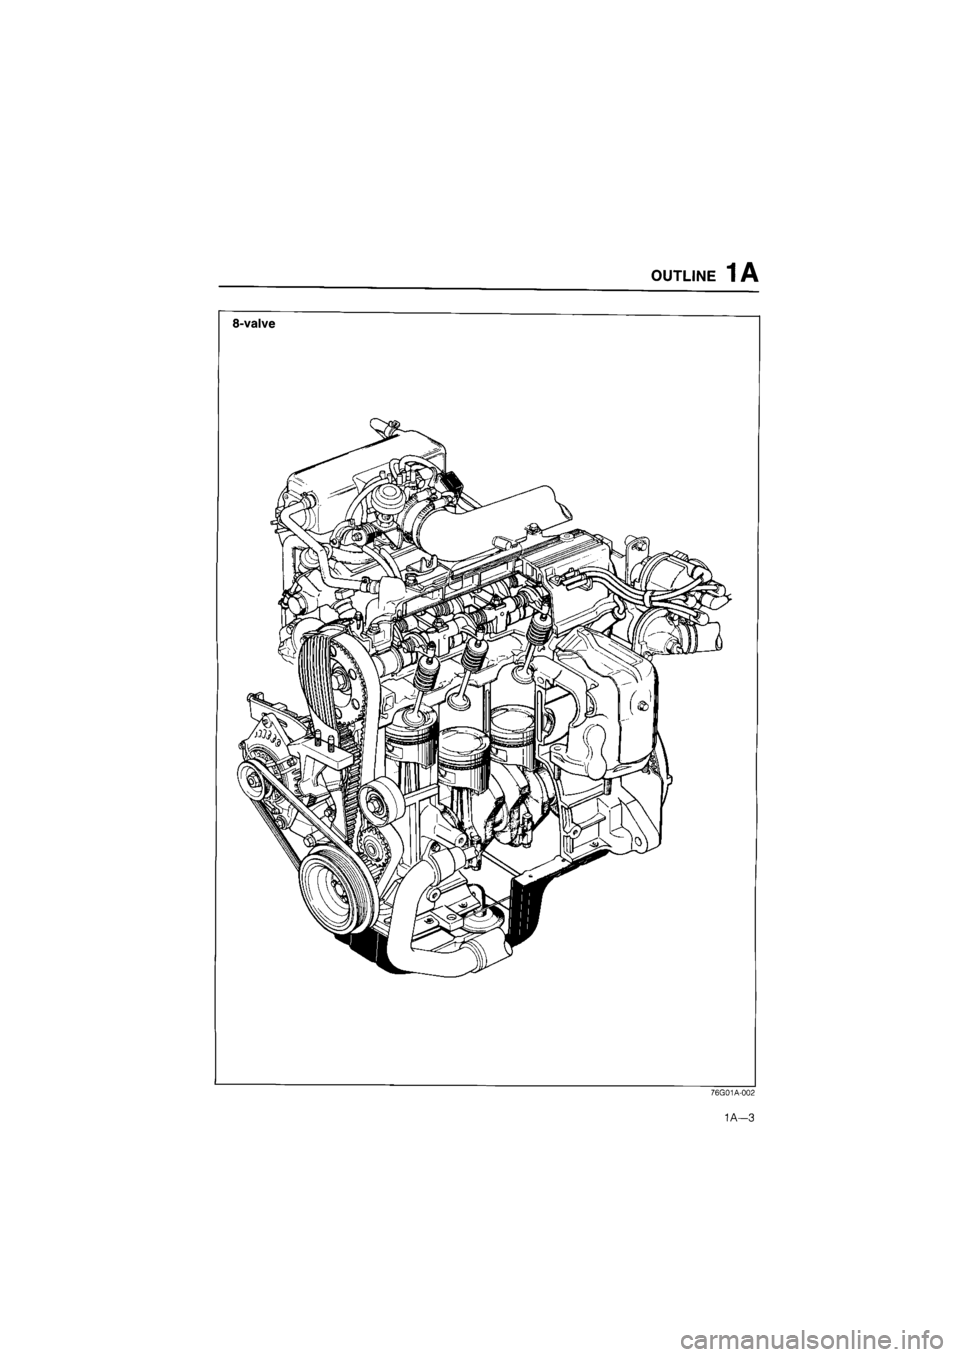 MAZDA 626 1987 Owners Guide OUTLINE
 1 A 

8-valve 
76G01A-002 

1A—3  